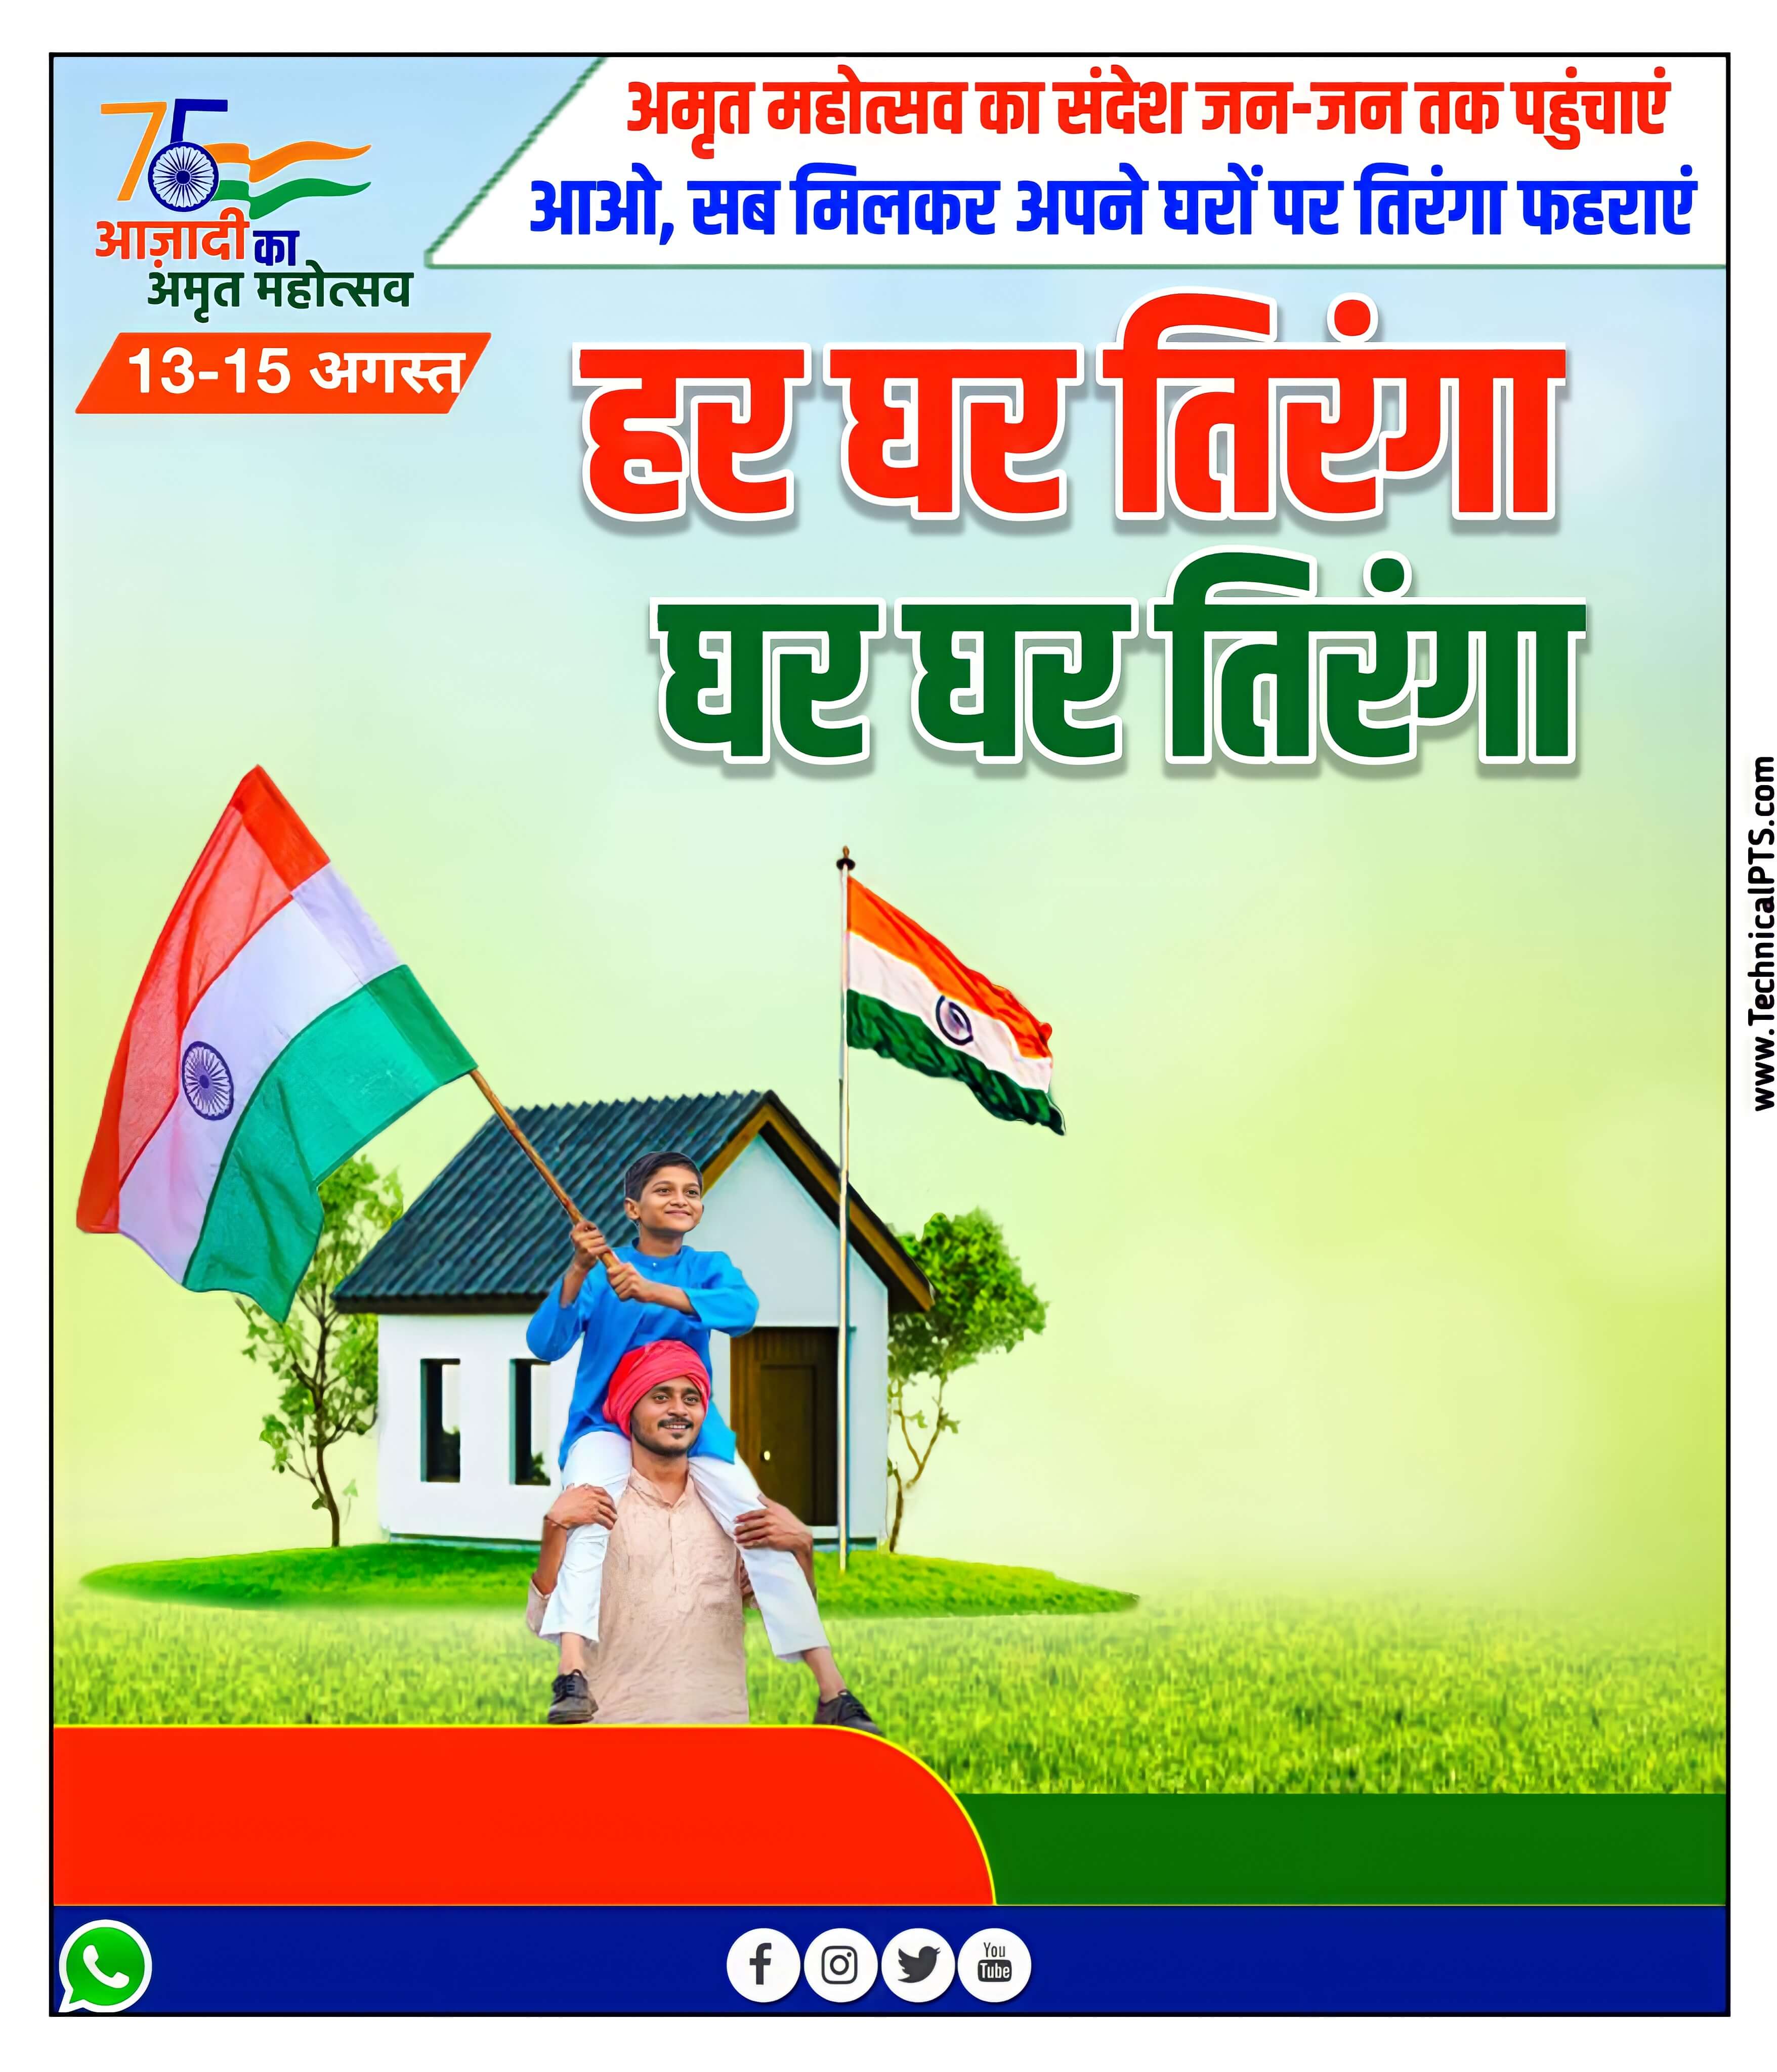 Har Ghar Tiranga campaign is to encourage people to hoist the flag in their  homes to mark the 75th year of India's independence under the aegis of  Azadi Ka Amrit Mahotsav. Stock